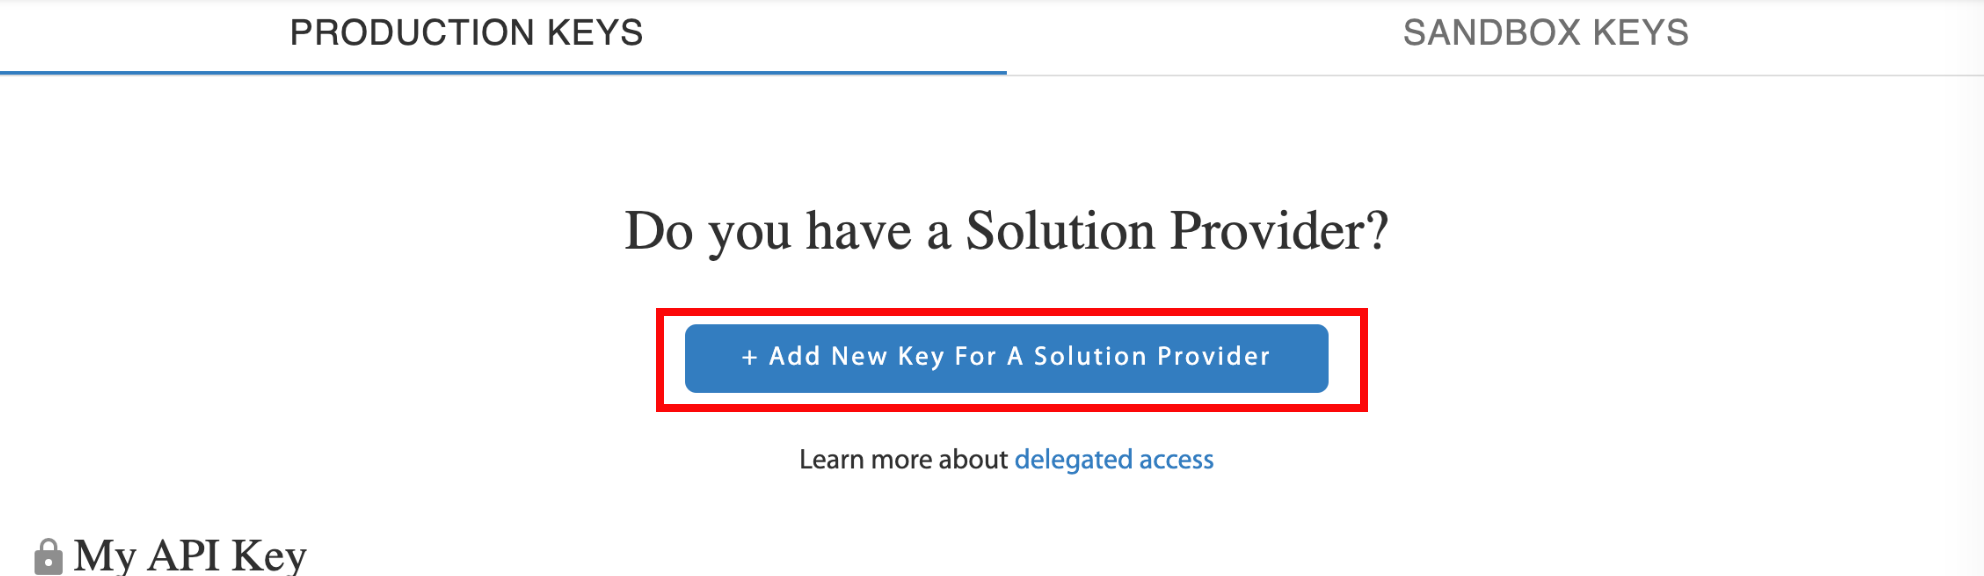 Do you have a solution provider button marked